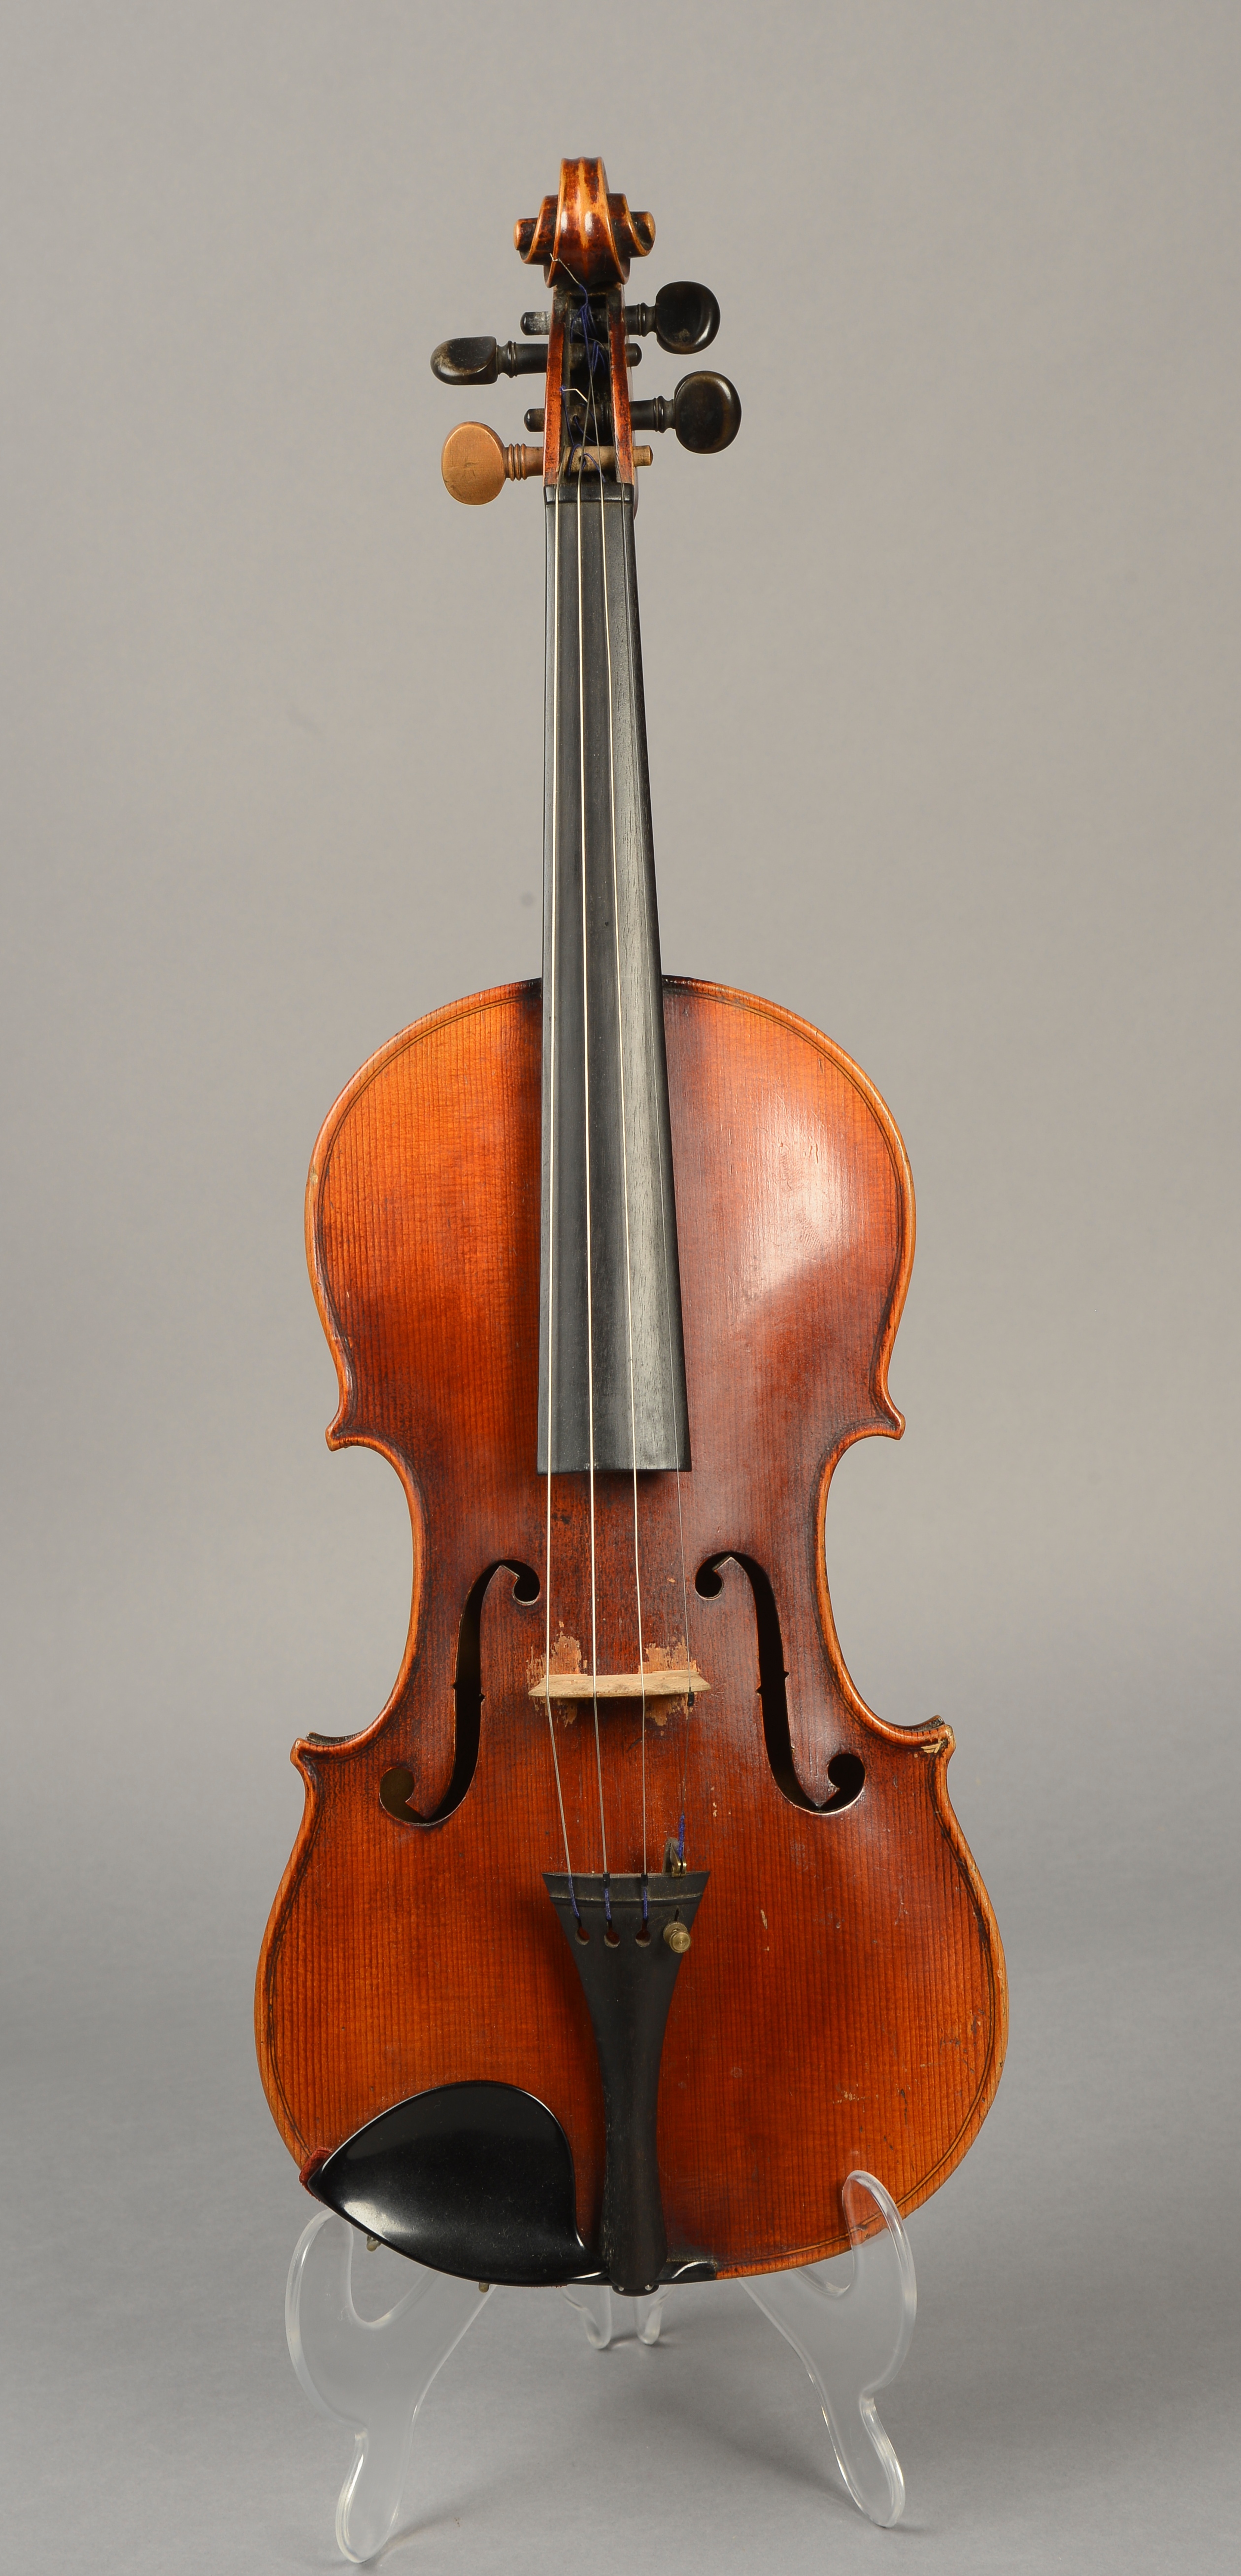 A 19TH CENTURY FRENCH VIOLIN BY VUILLAME, PARIS, with two piece flamed maple back and sides,